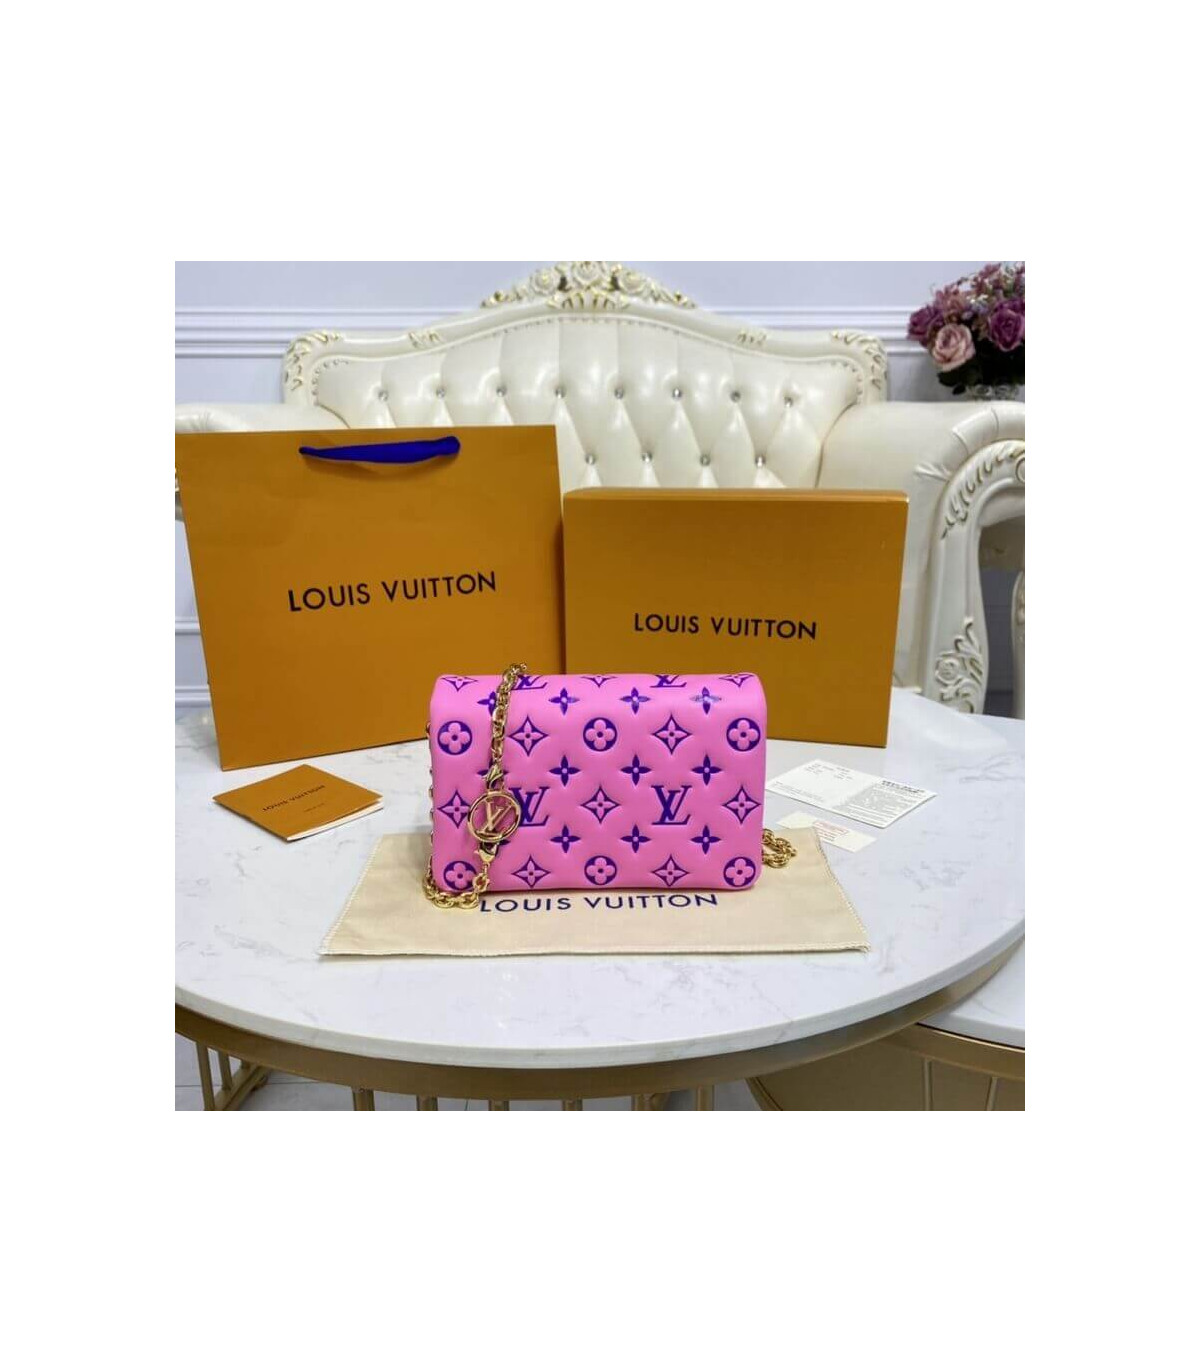 Unboxing the Louis Vuitton coussin PM in Rose Miami pink 💖 I am in lo